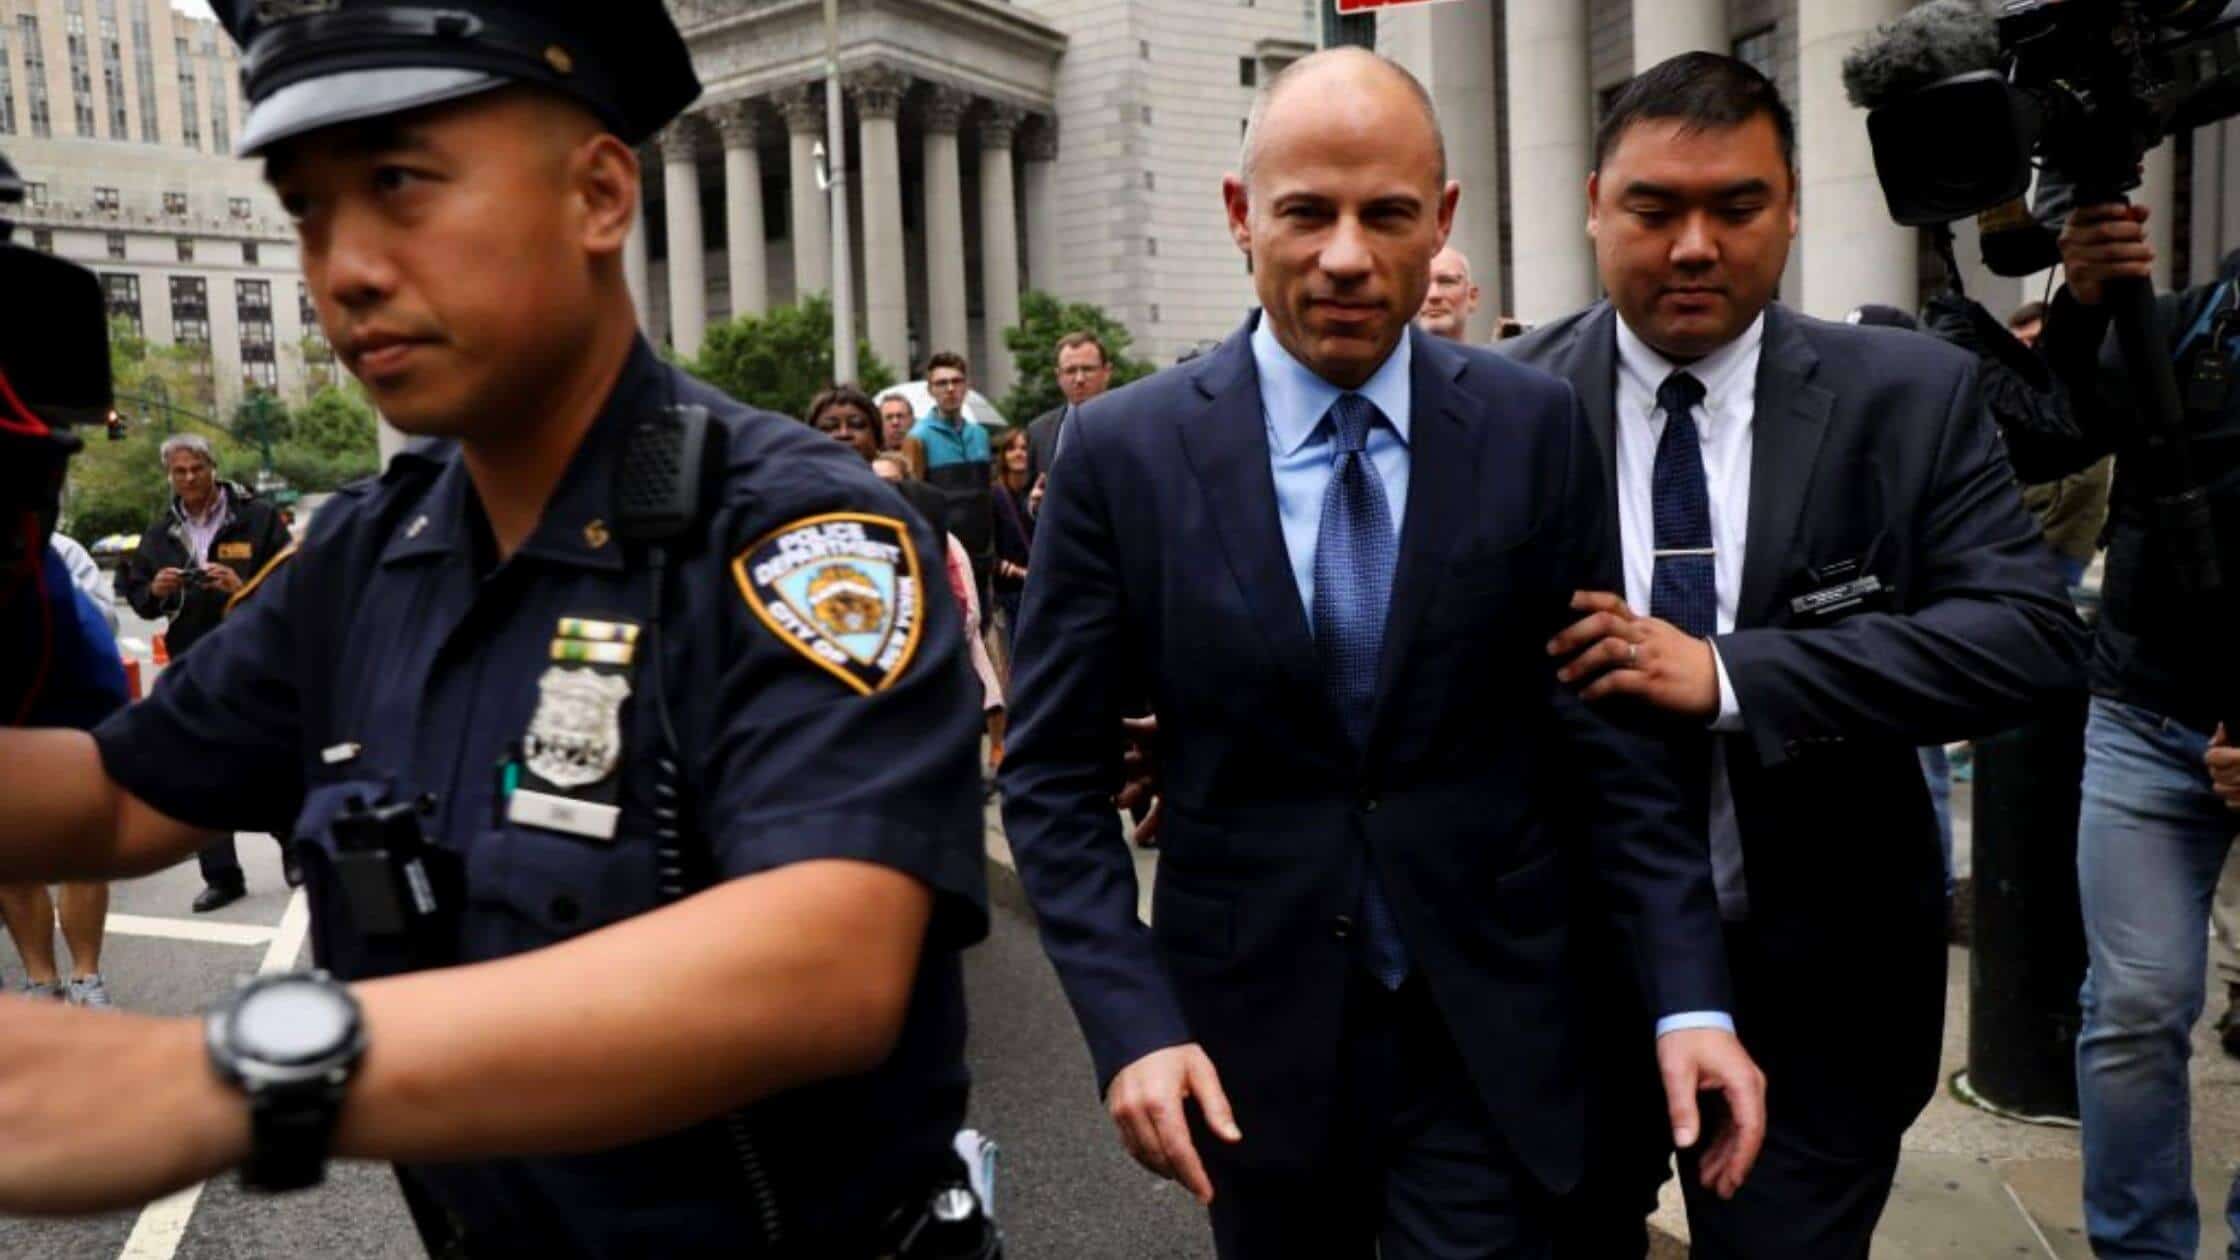 Michael Avenatti Is Sentenced To 14 Years In Prison For Stealing Millions From Clients